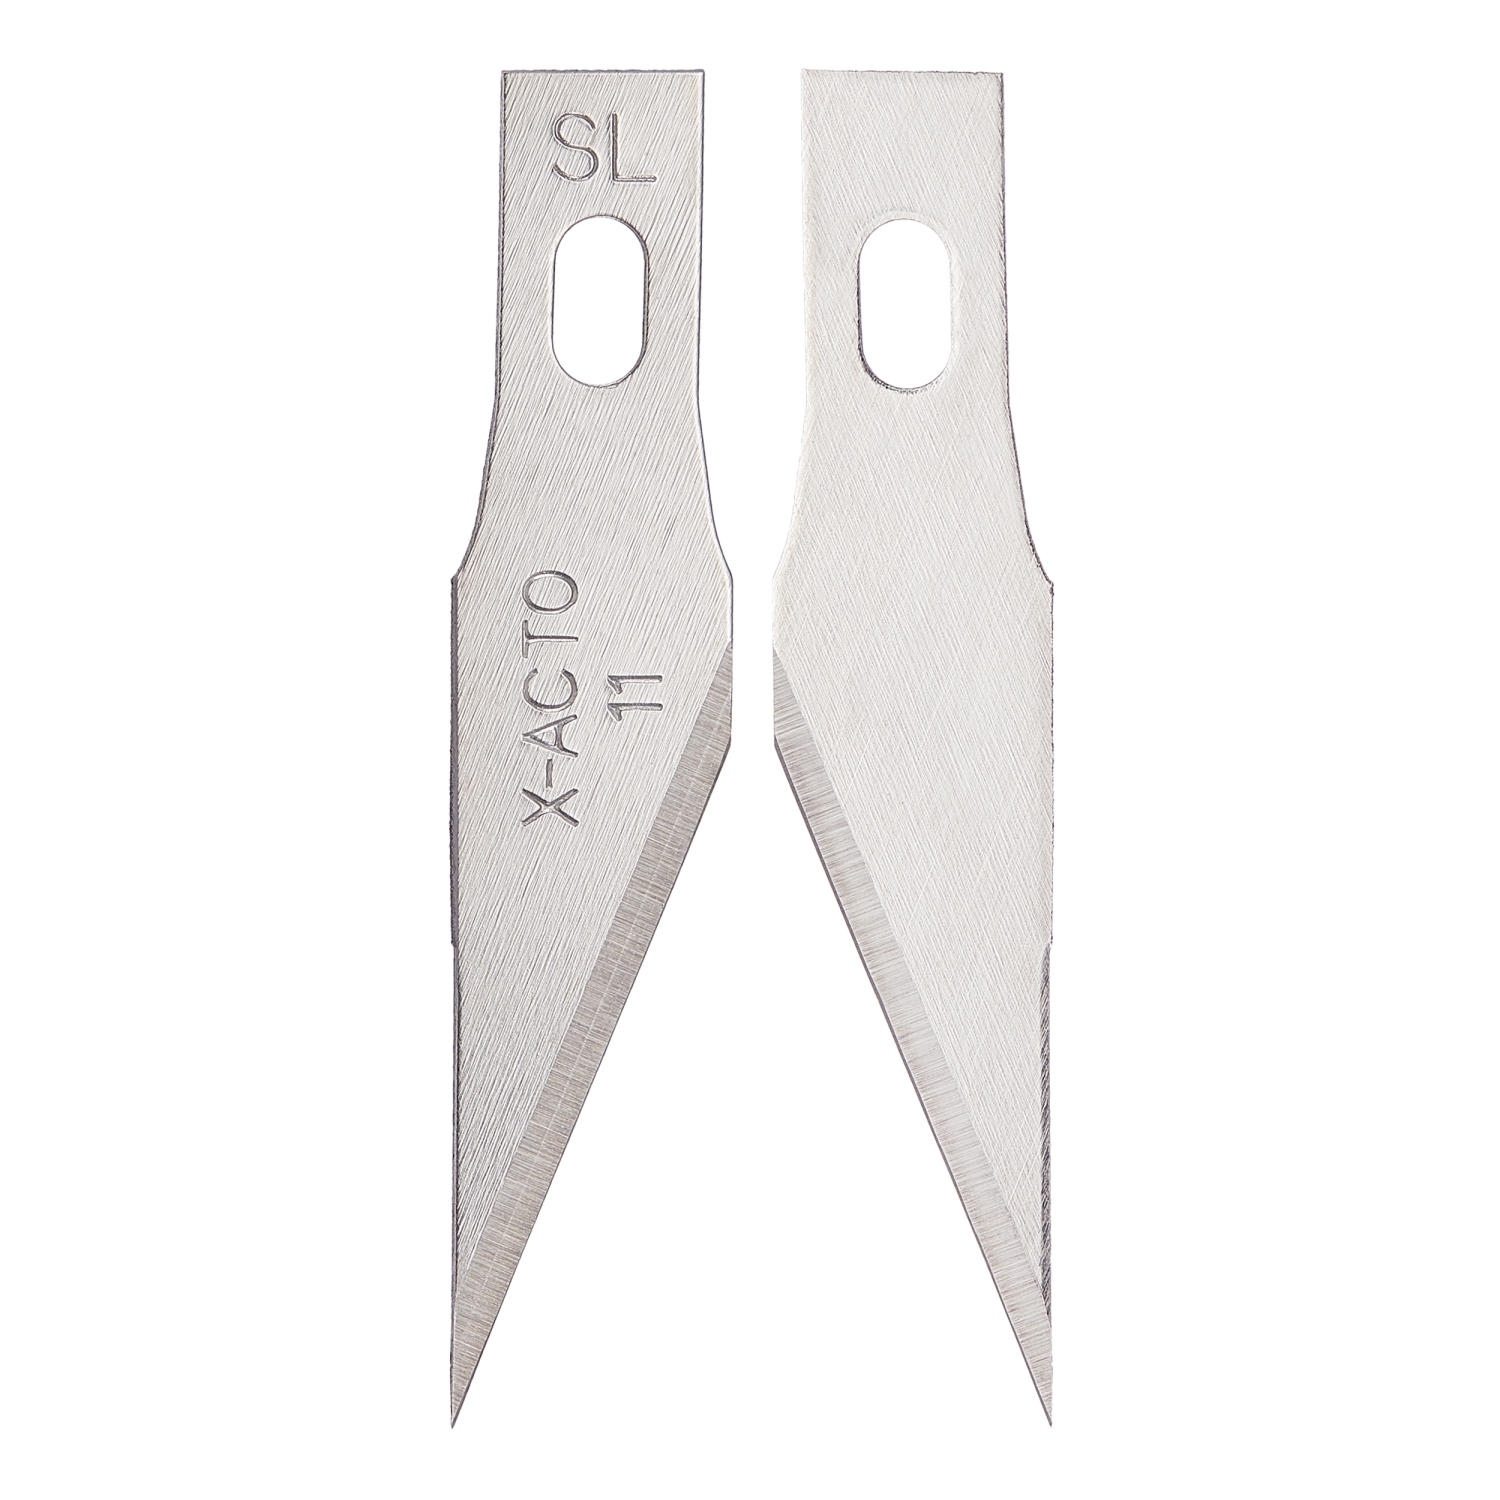 Replacement BSD X-Acto Knife (No.11) (10 Pack)